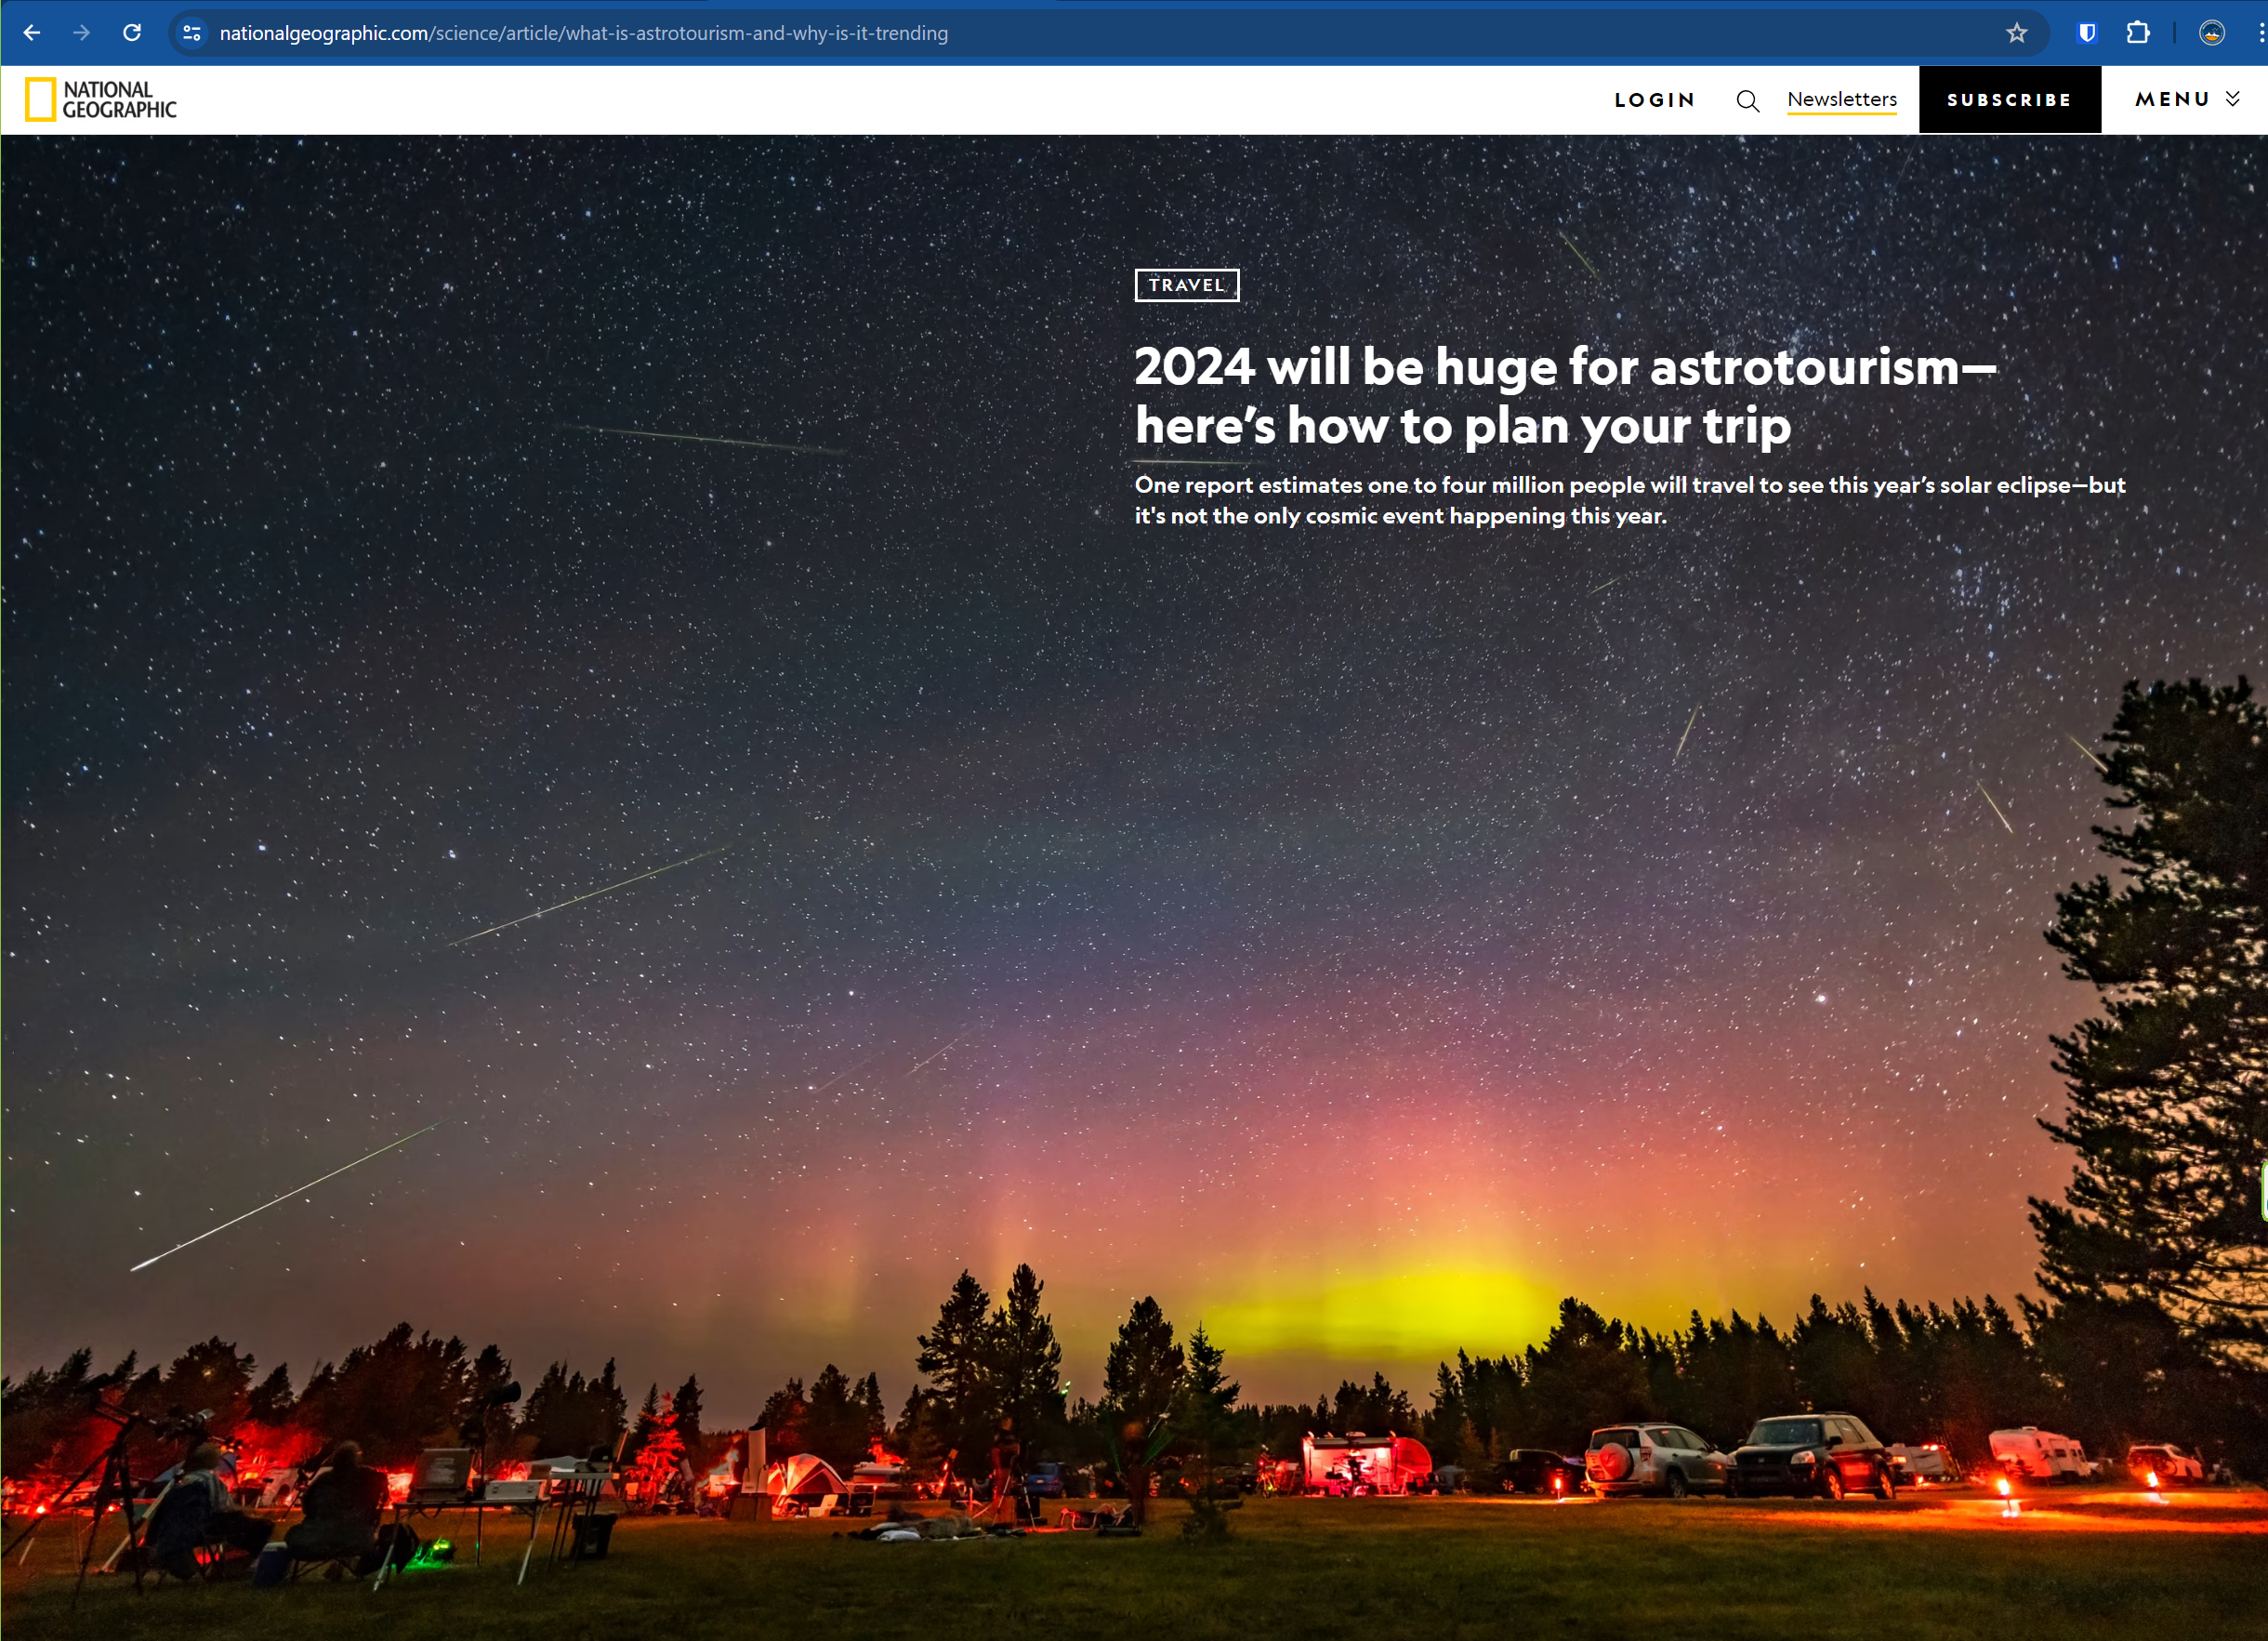 National Geographic - 2024 will be huge for astrotourism